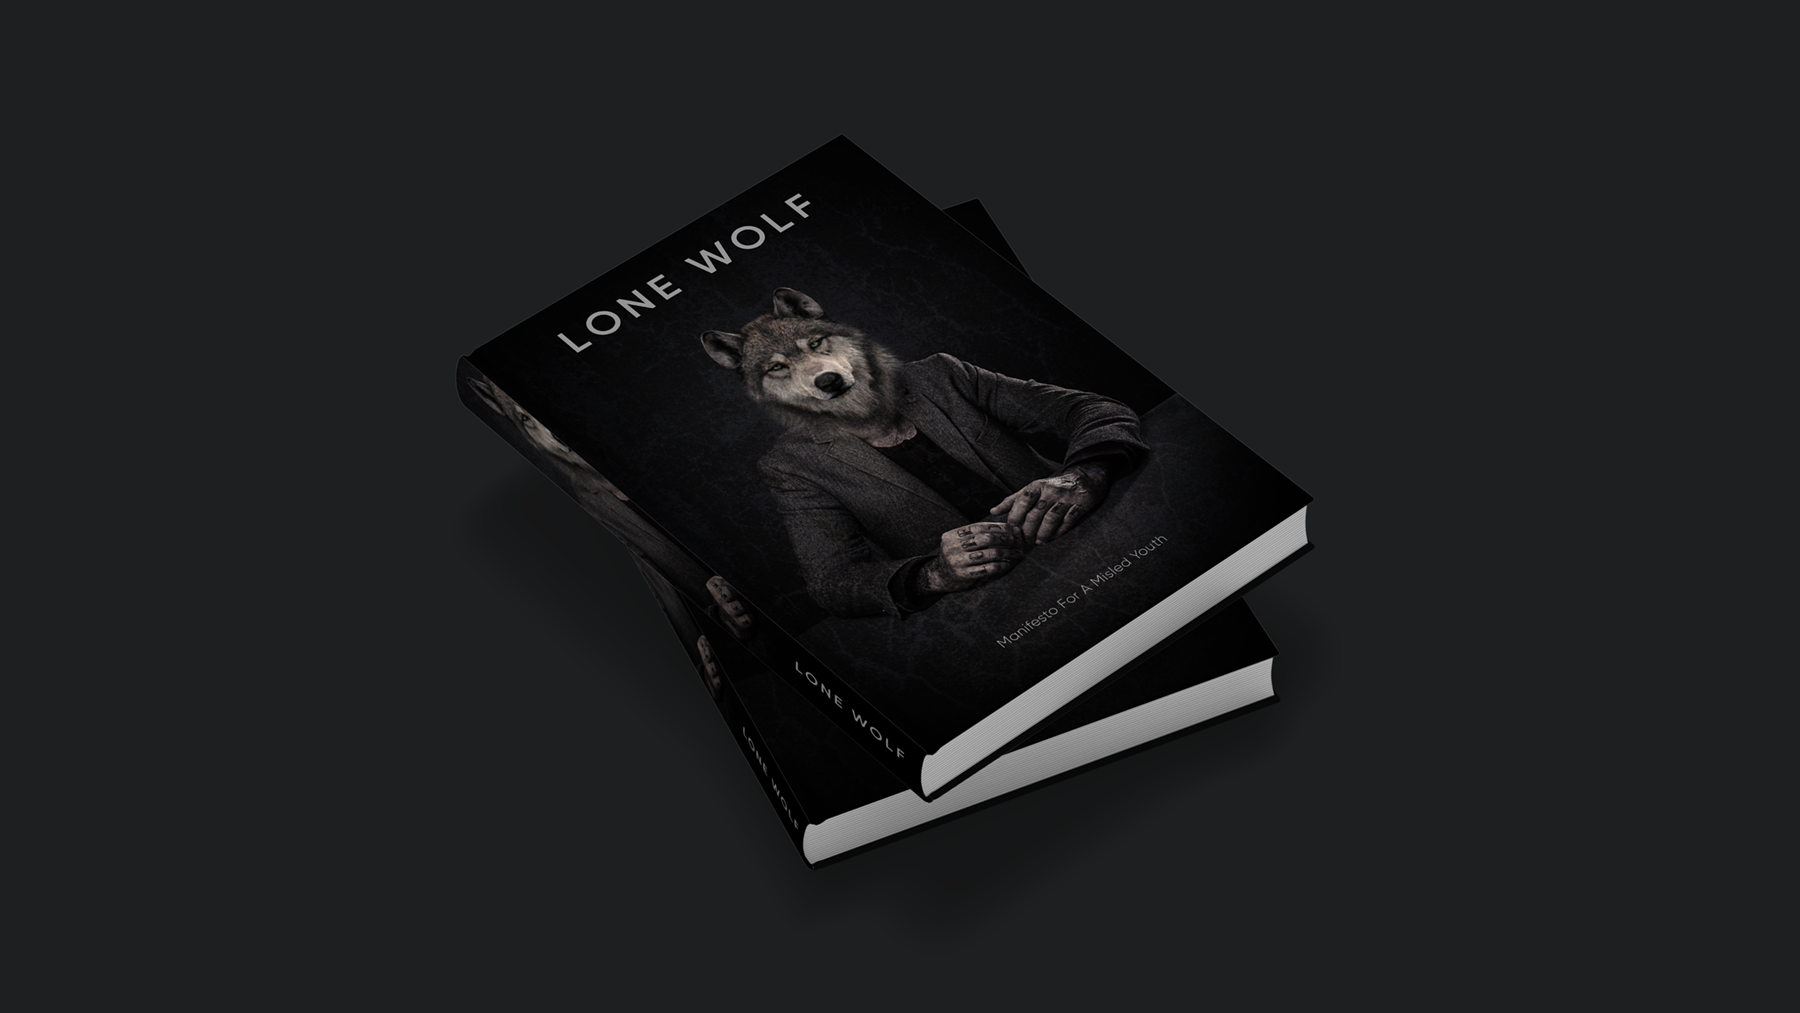 Book cover design featuring a man with a wolf's head.